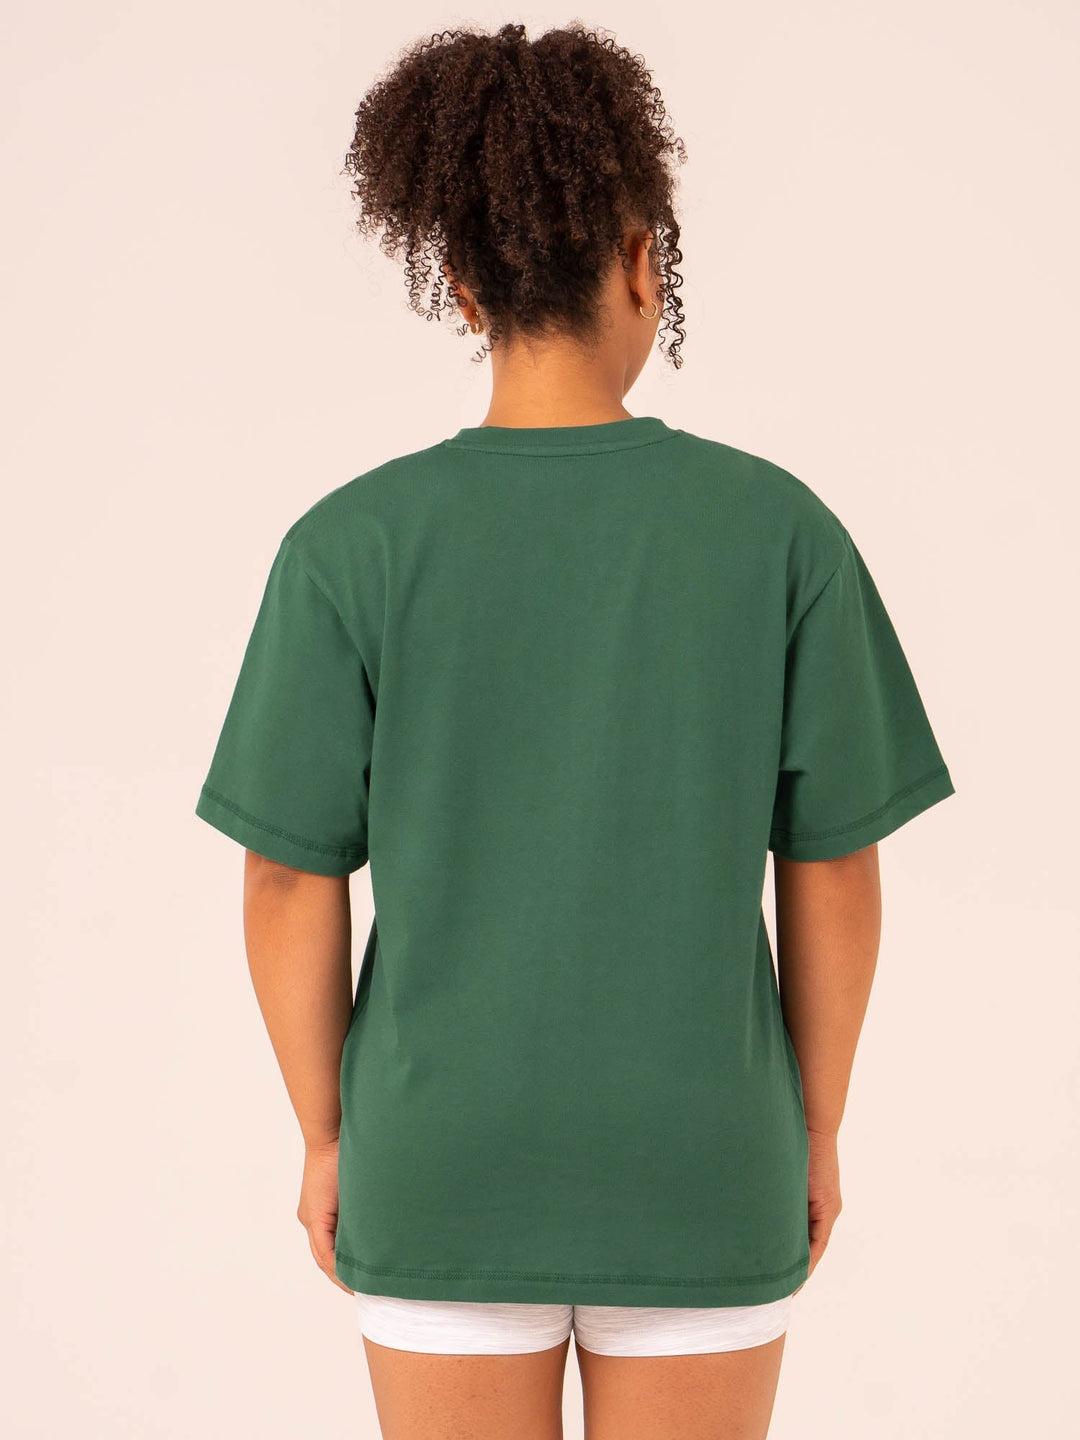 Tempo Oversized T-Shirt - College Green Clothing Ryderwear 